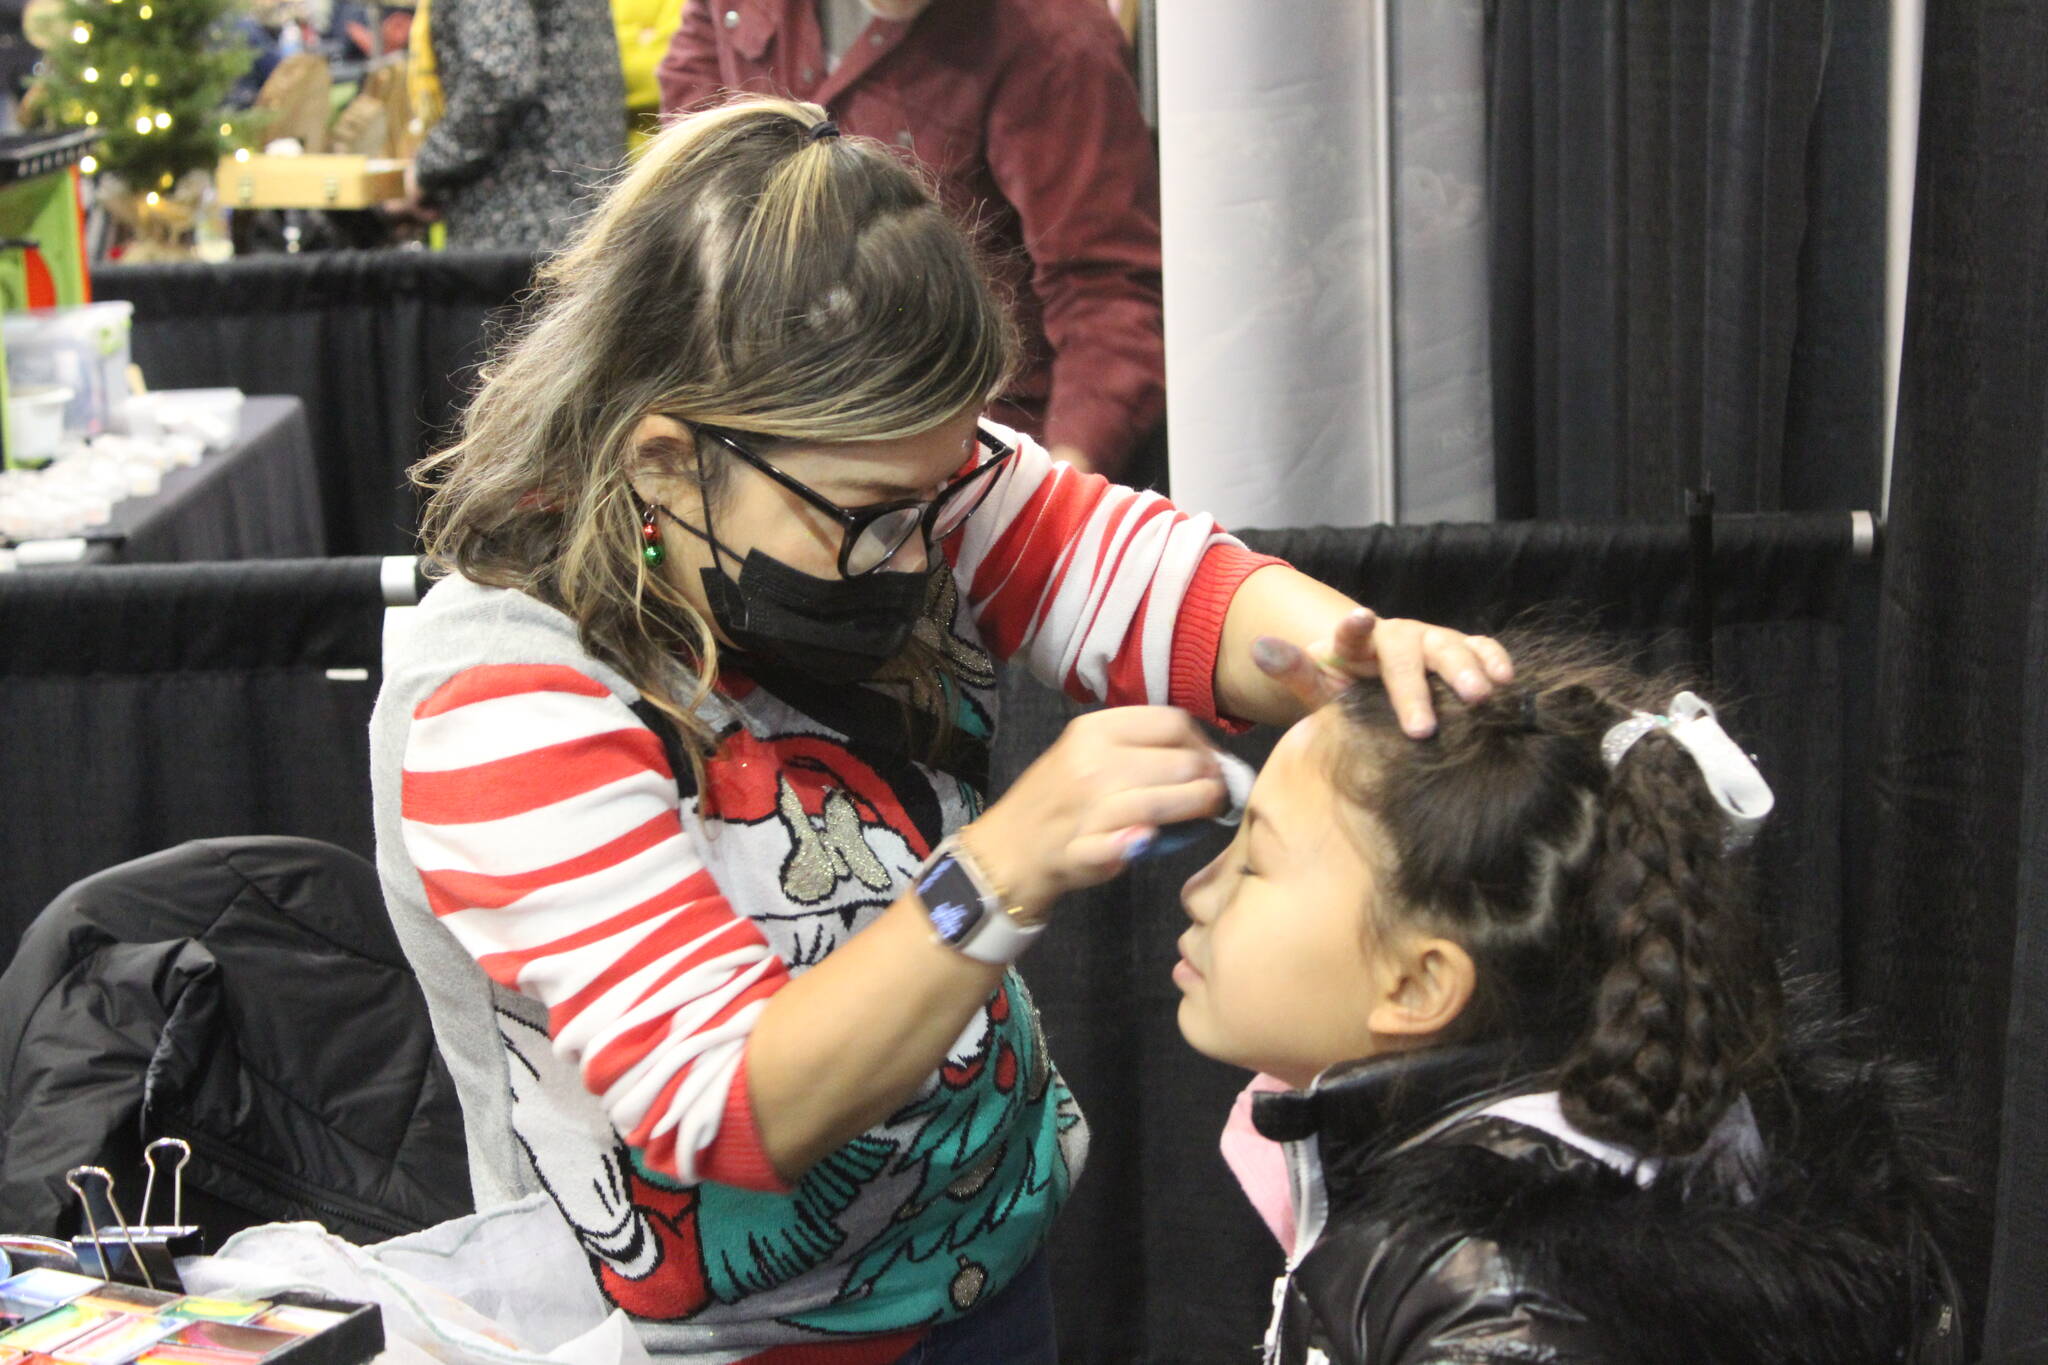 Photo by Bailey Jo Josie/Sound Publishing.
Face painting was a popular booth for kids to visit as they waited for Santa.